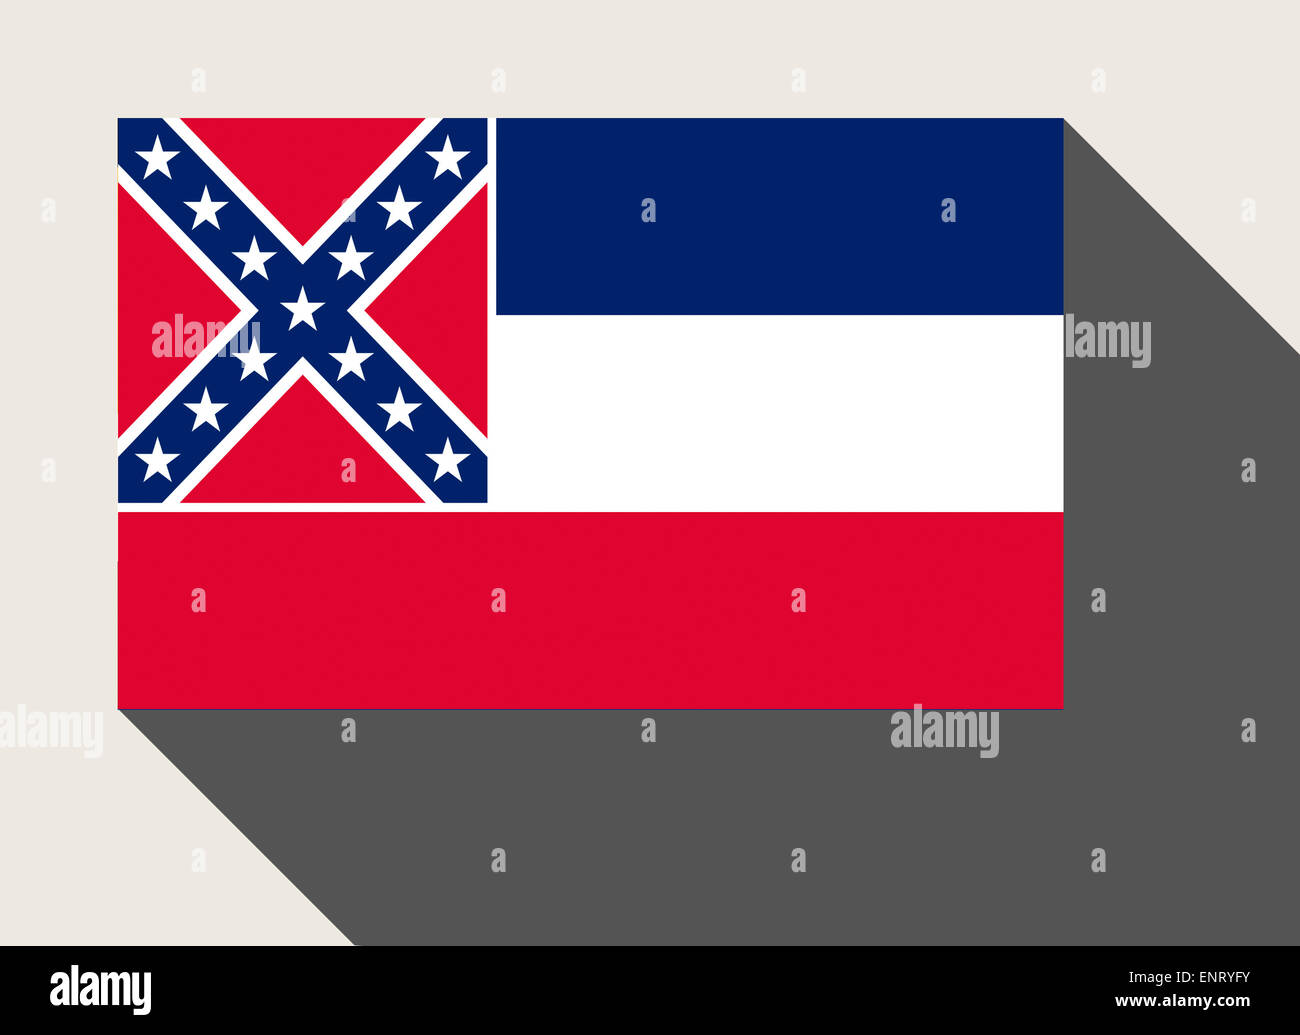 American State of Mississippi flag in flat web design style. Stock Photo